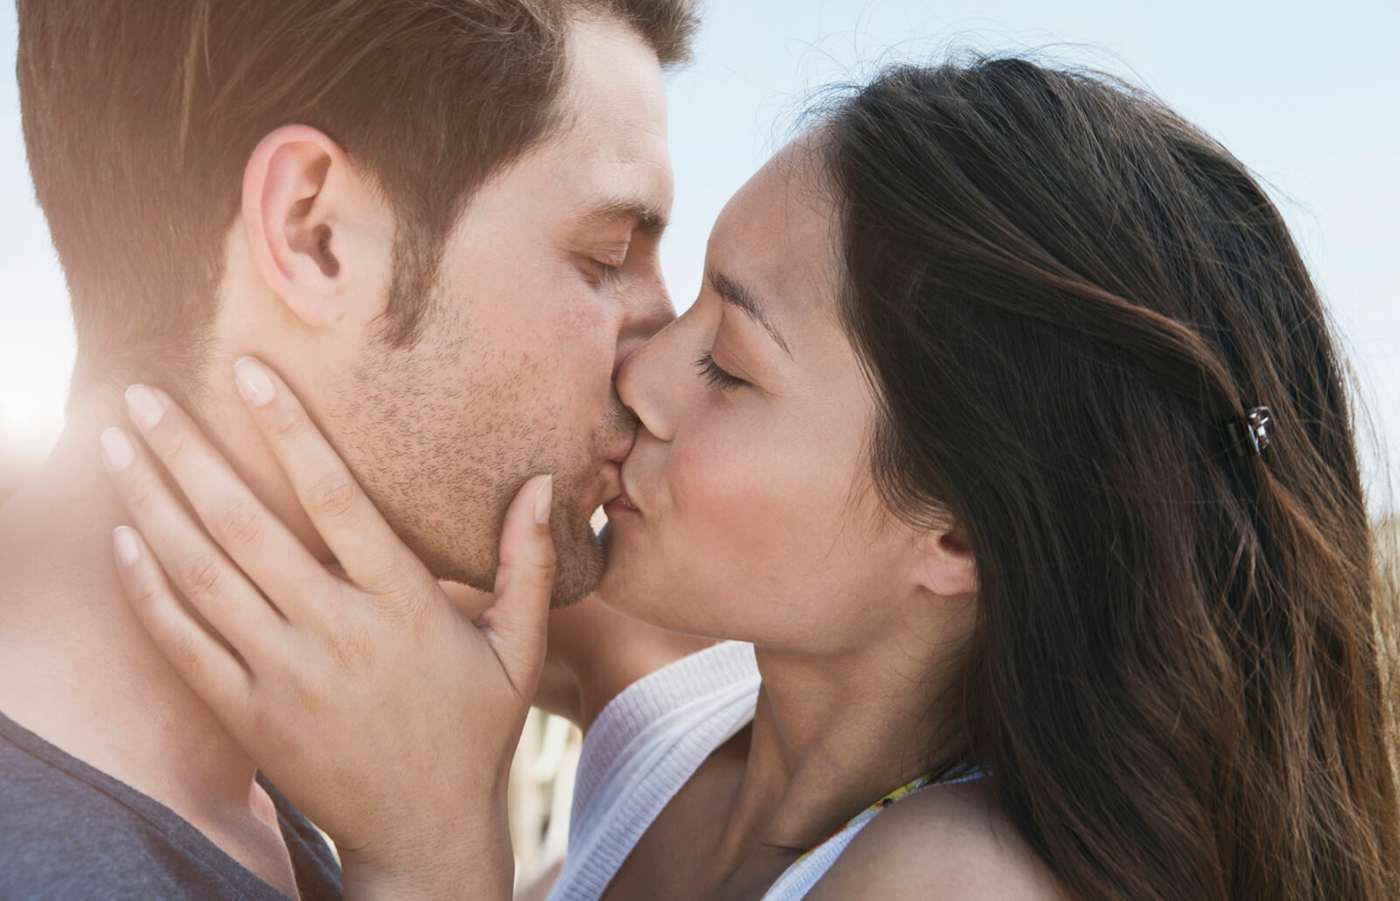 Kissing is prohibited from blistering and until cured to prevent an infection